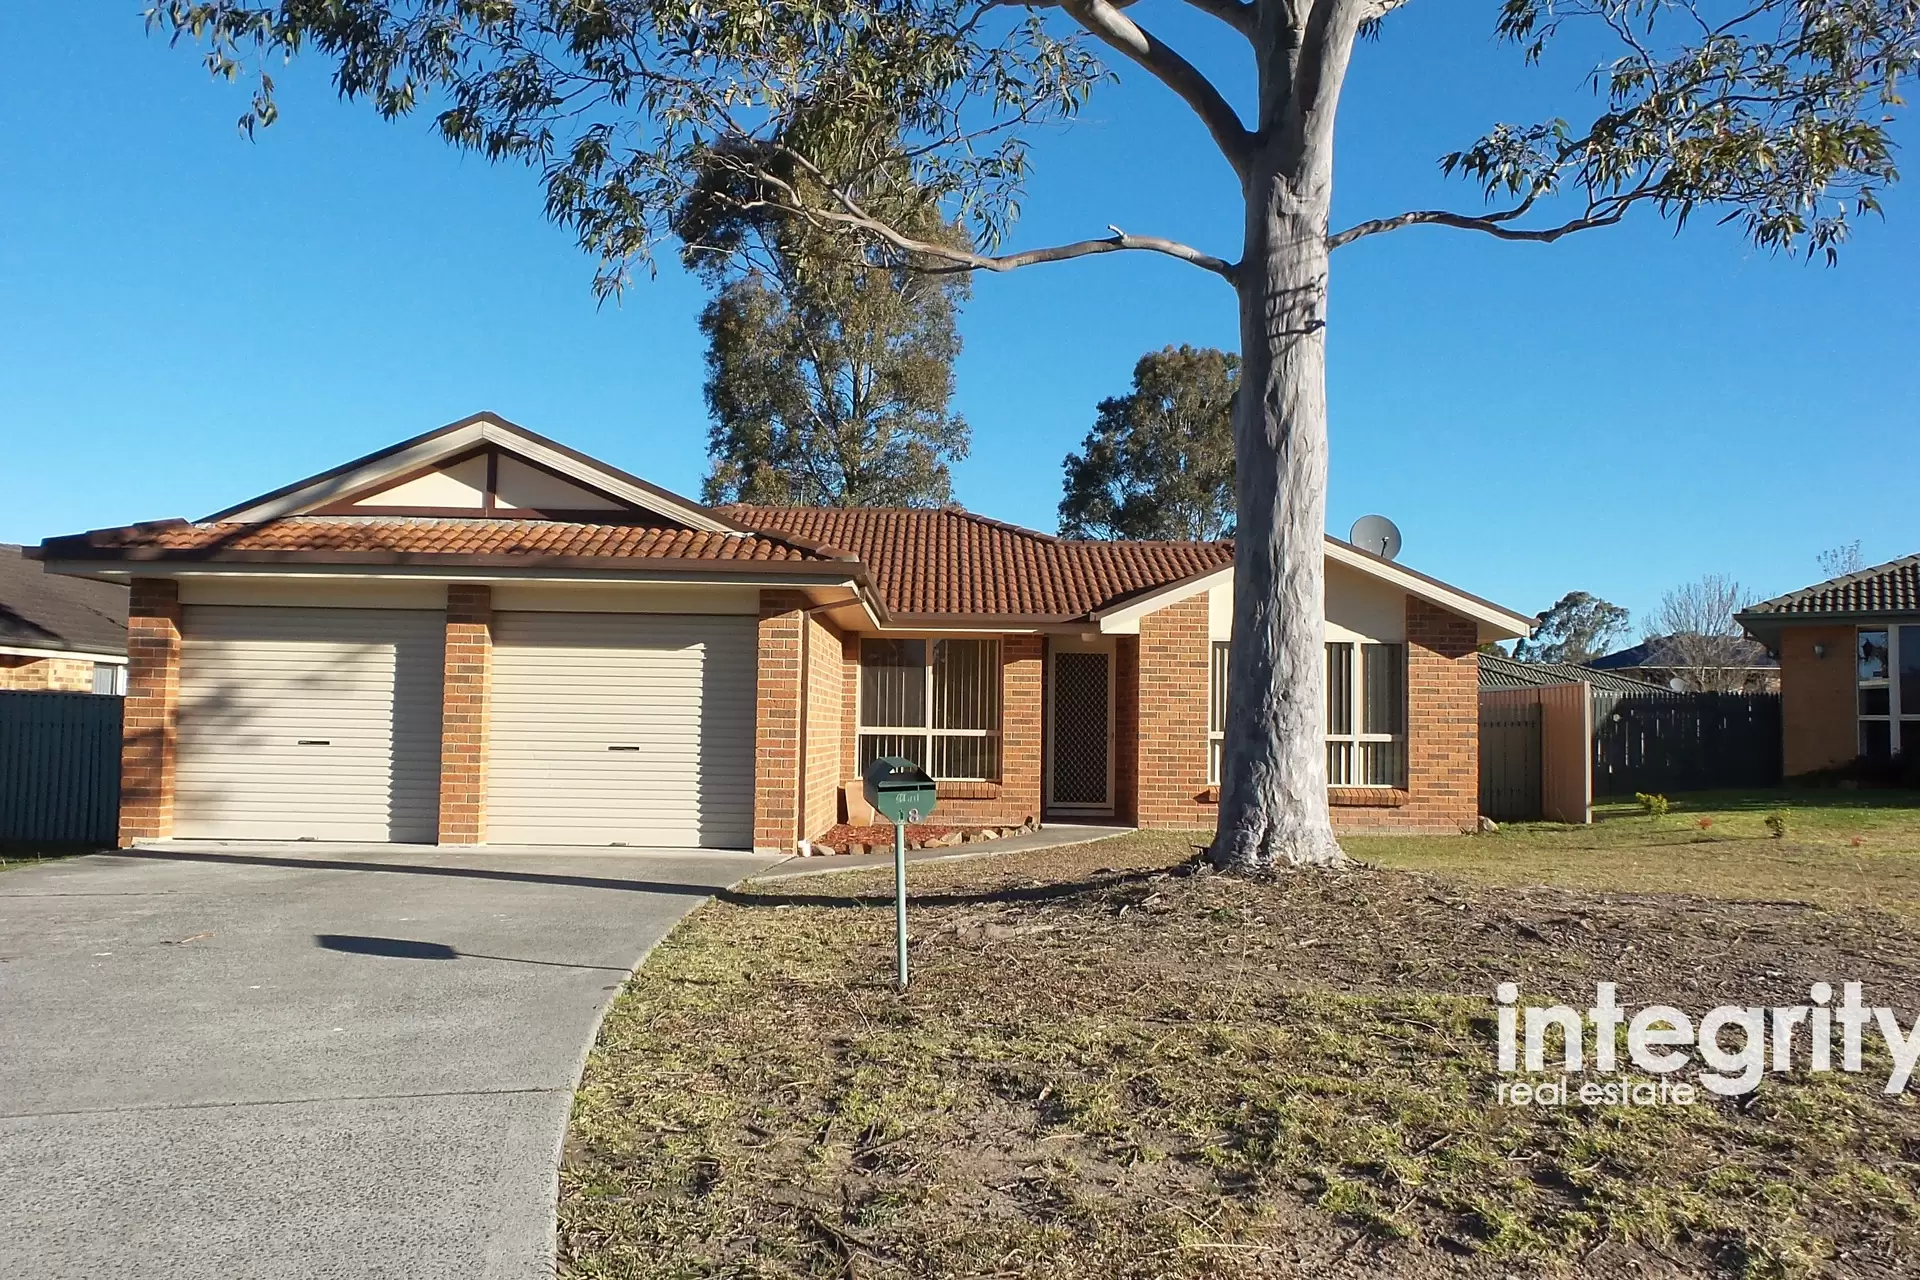 18 Hermes Crescent, Worrigee For Lease by Integrity Real Estate - image 1